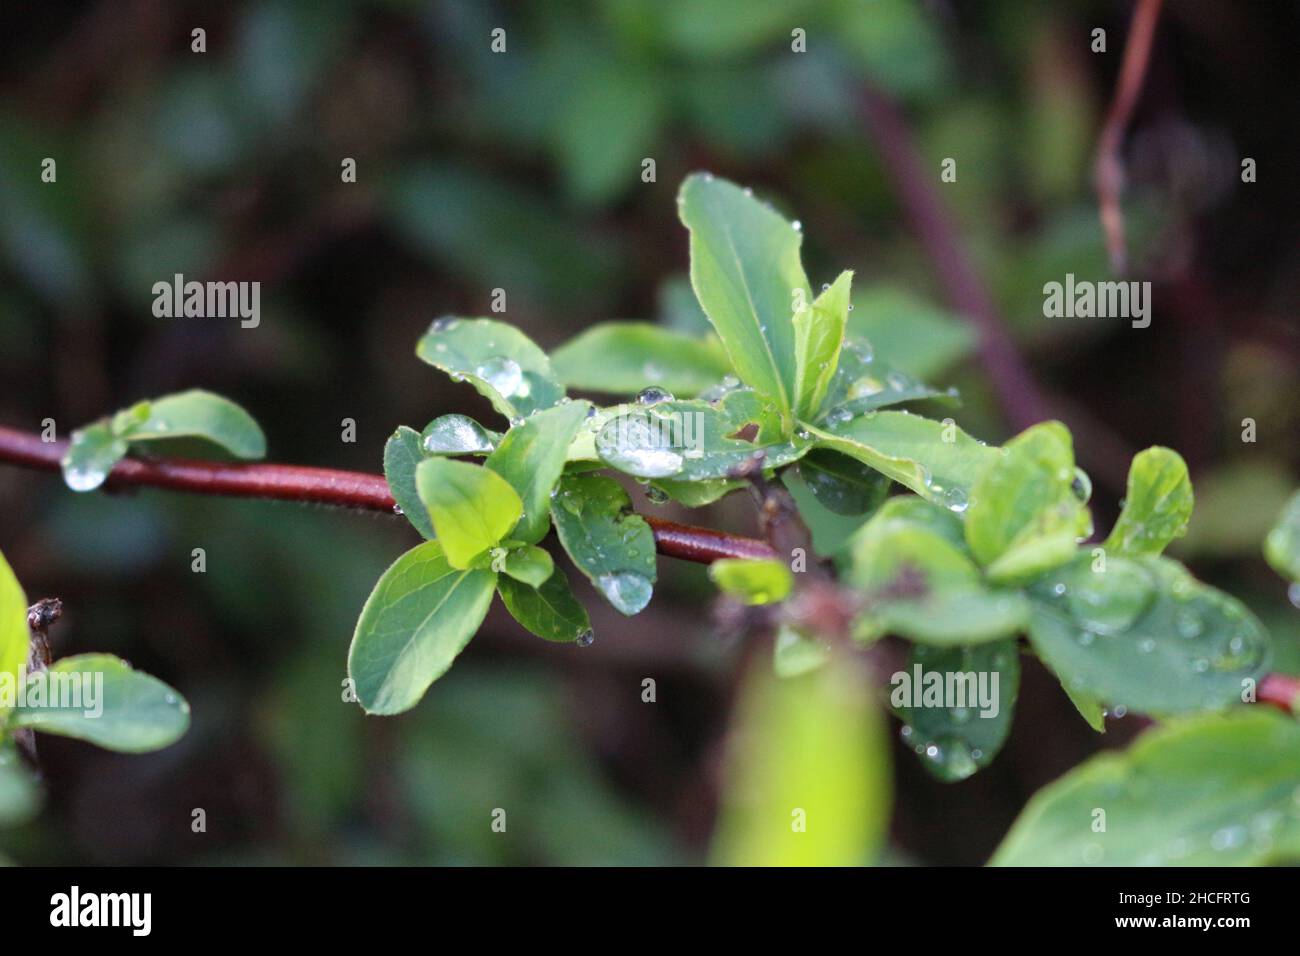 Shallow focus of drops of water on Euphorbia spathulata leaves with blurred background in the park Stock Photo